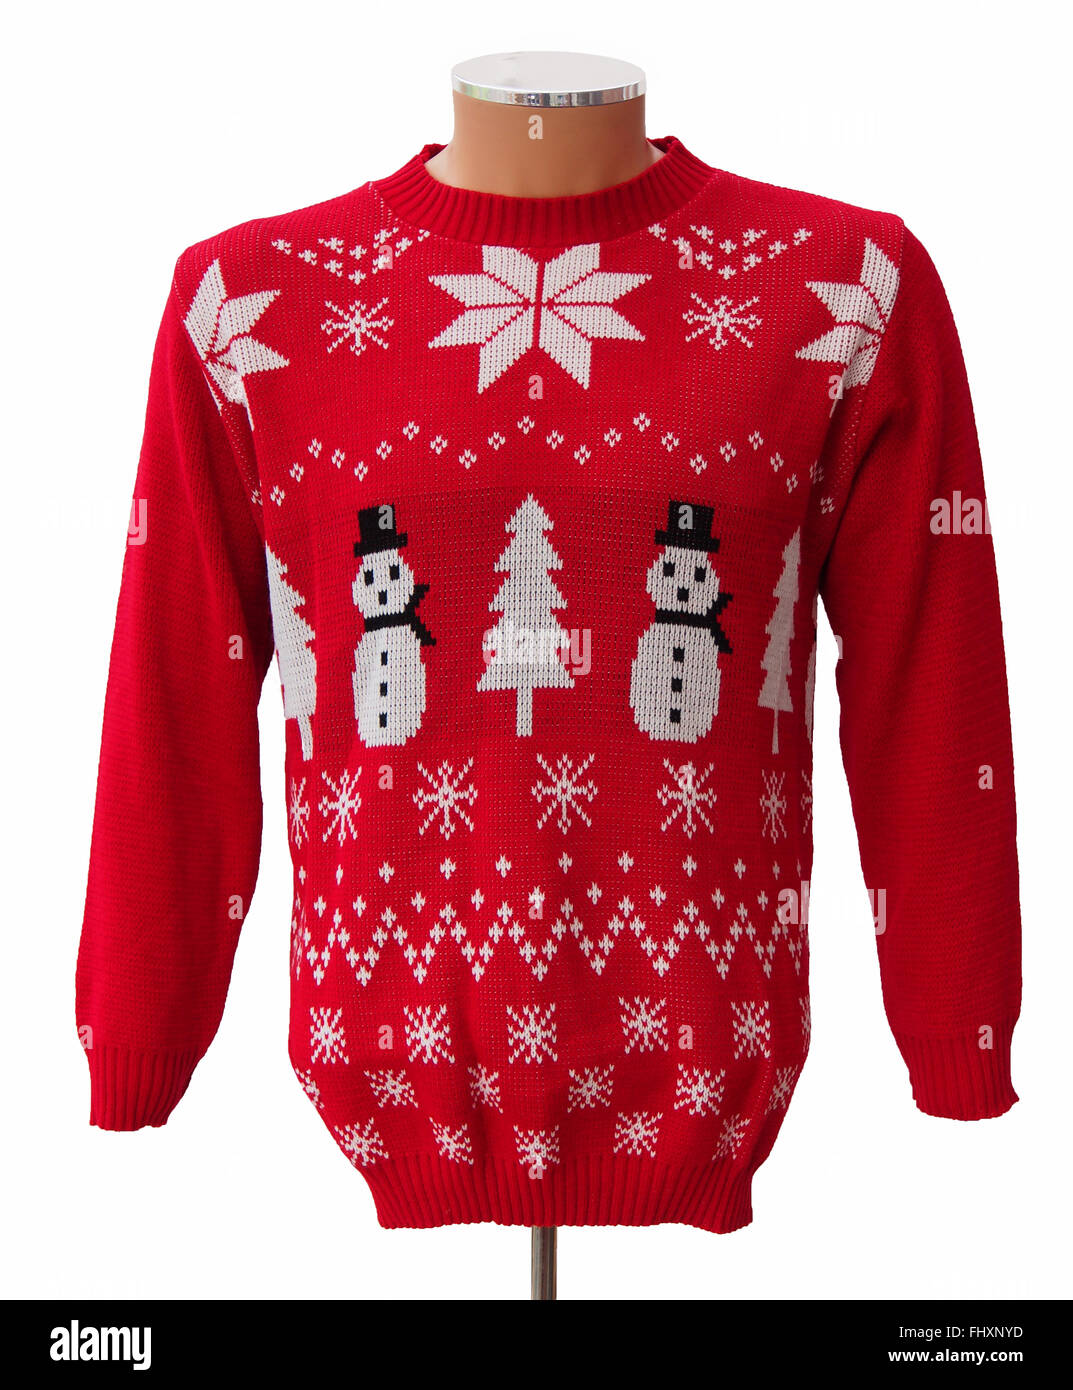 Red and white knitted adults' Christmas jumper, featuring snowmen, Xmas trees and snowflakes, isolated on a white background. Stock Photo